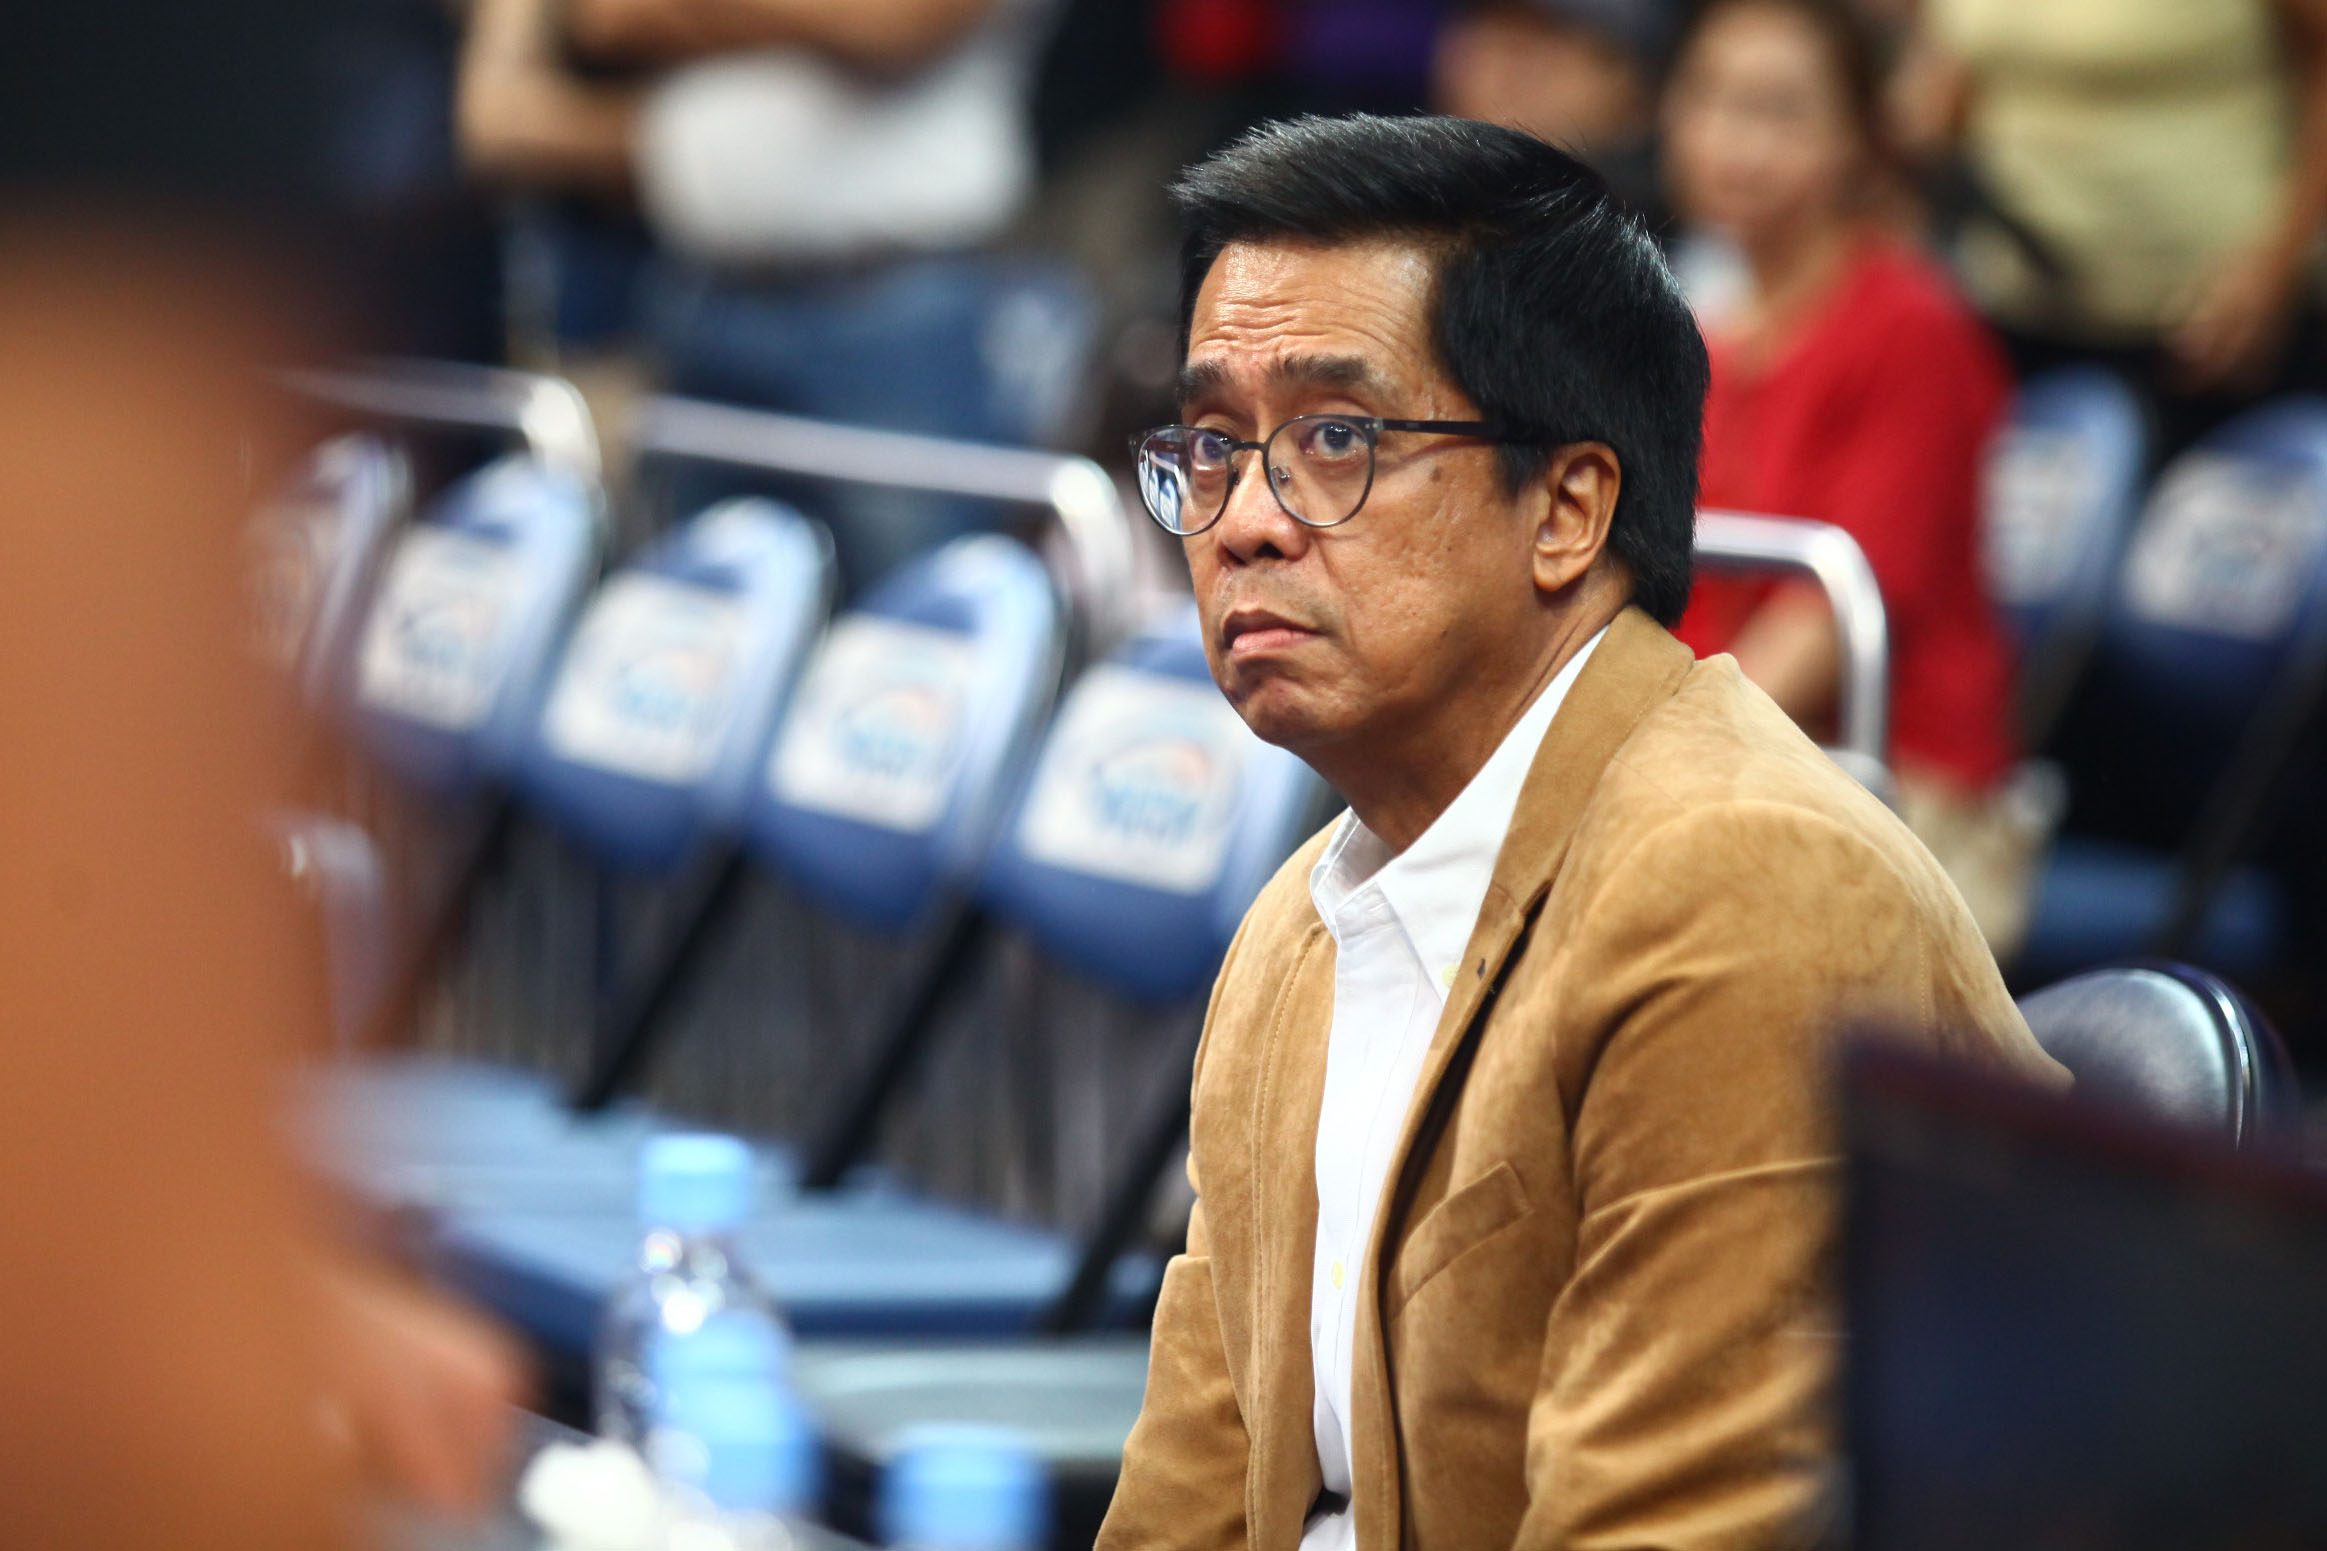 PBA mum on Pacquiao’s LGBT comments